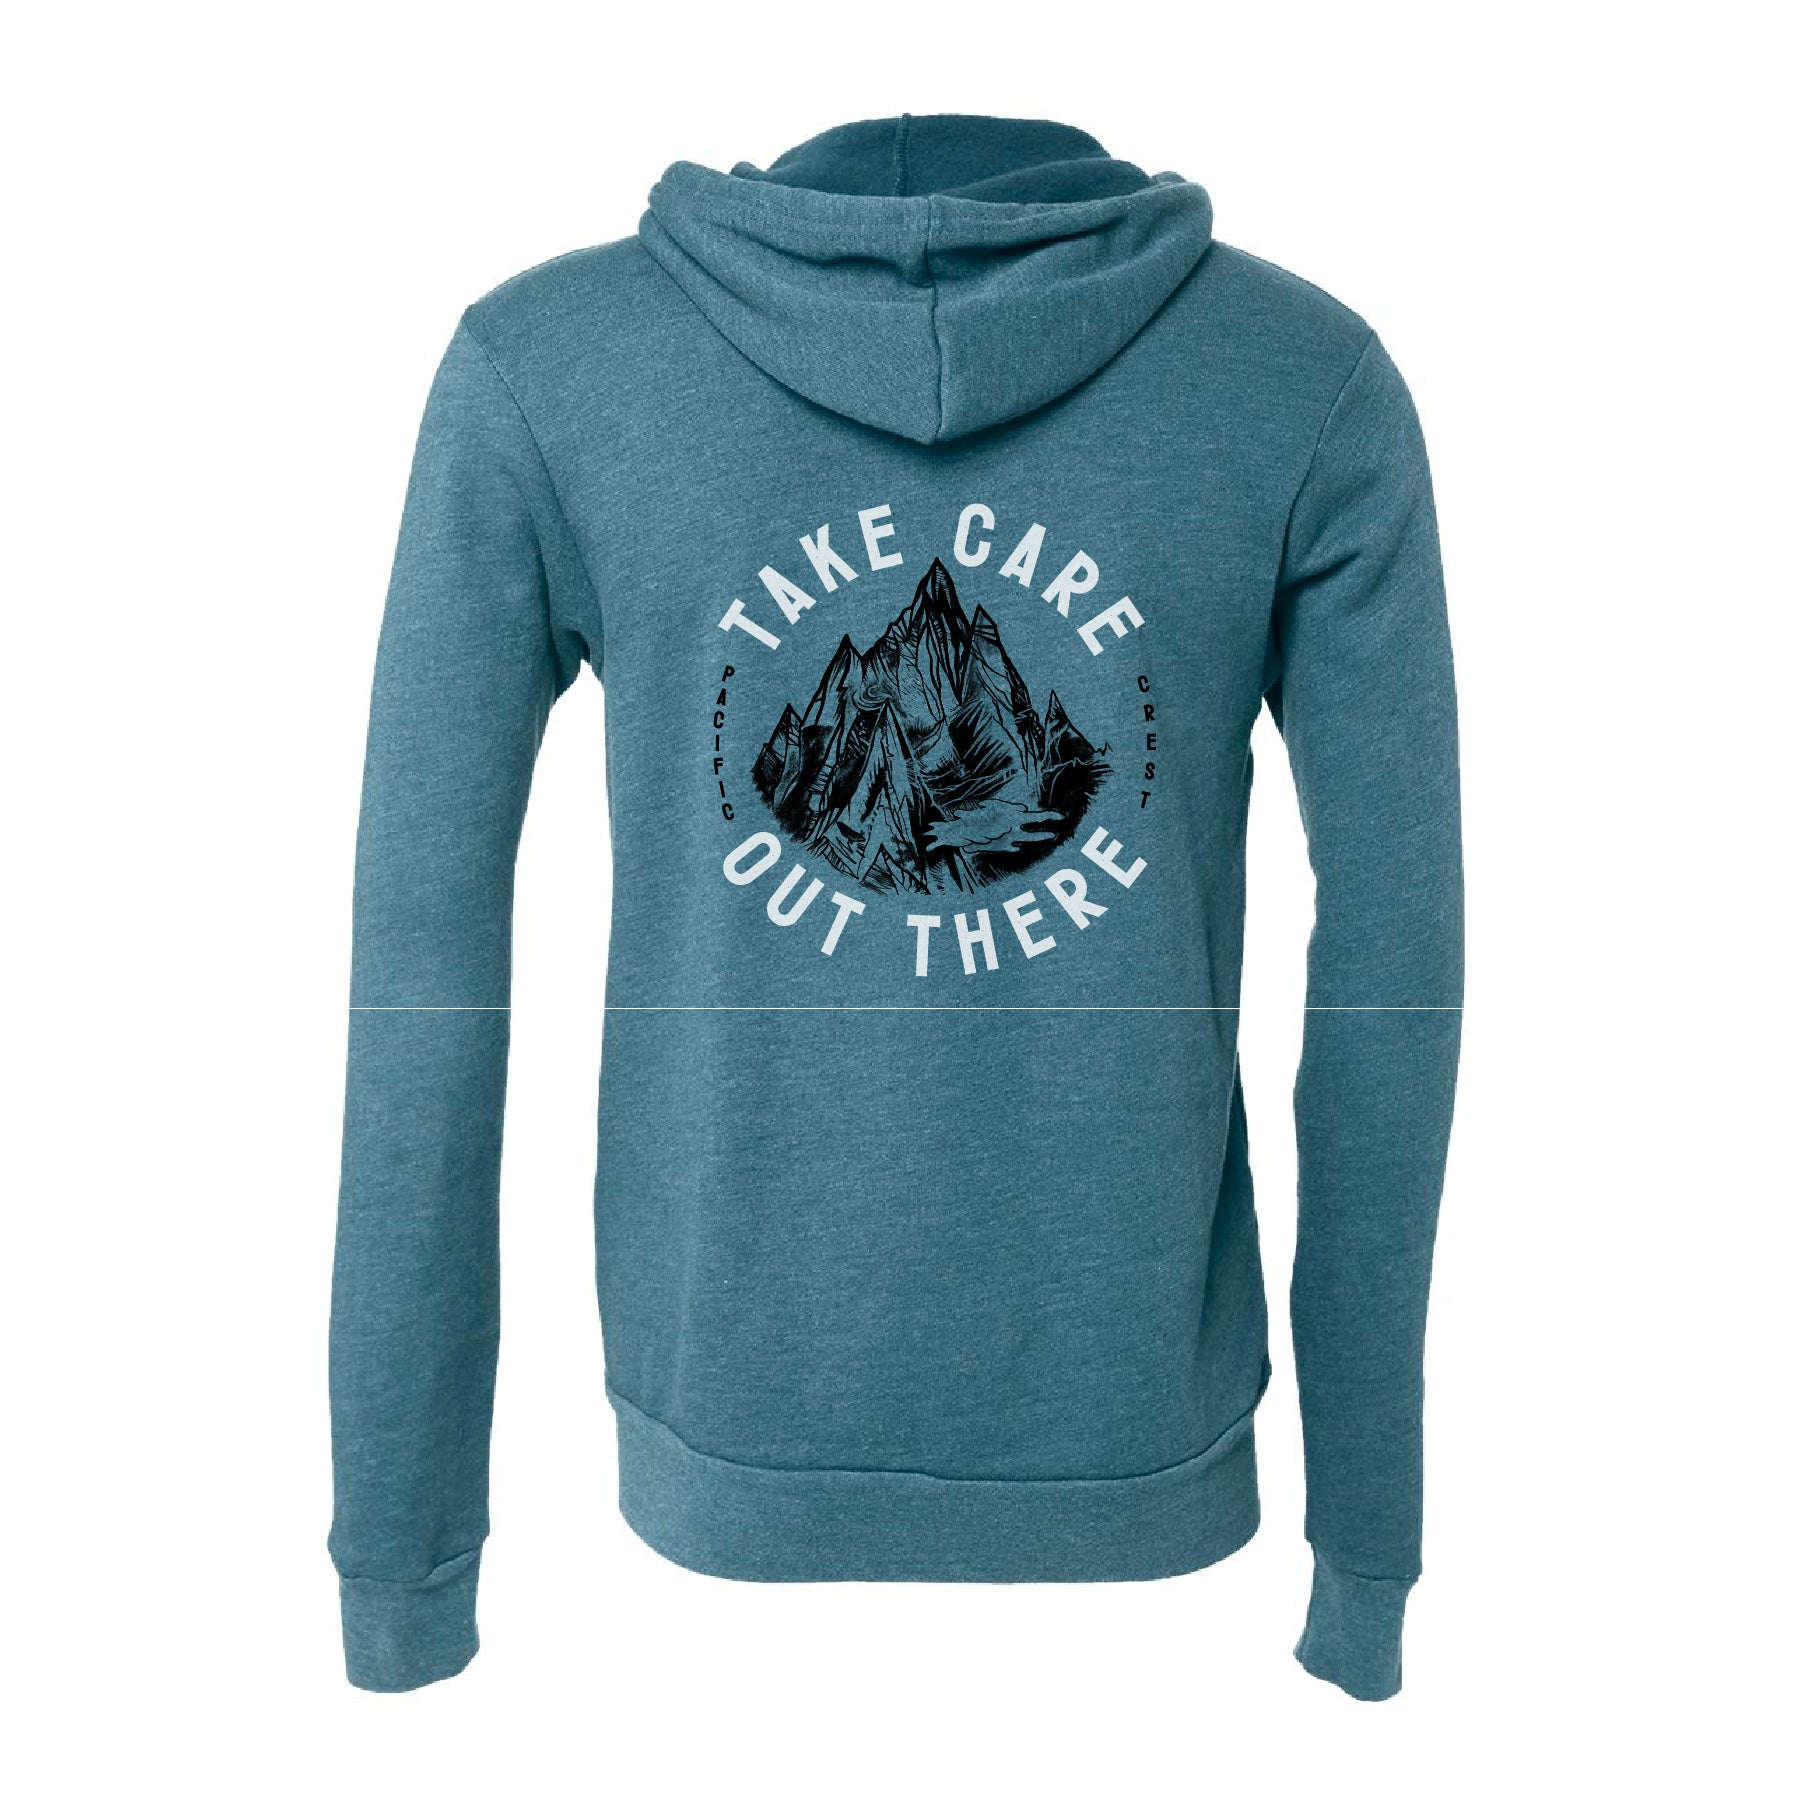 Take Care Out There- Zipping Hoodie